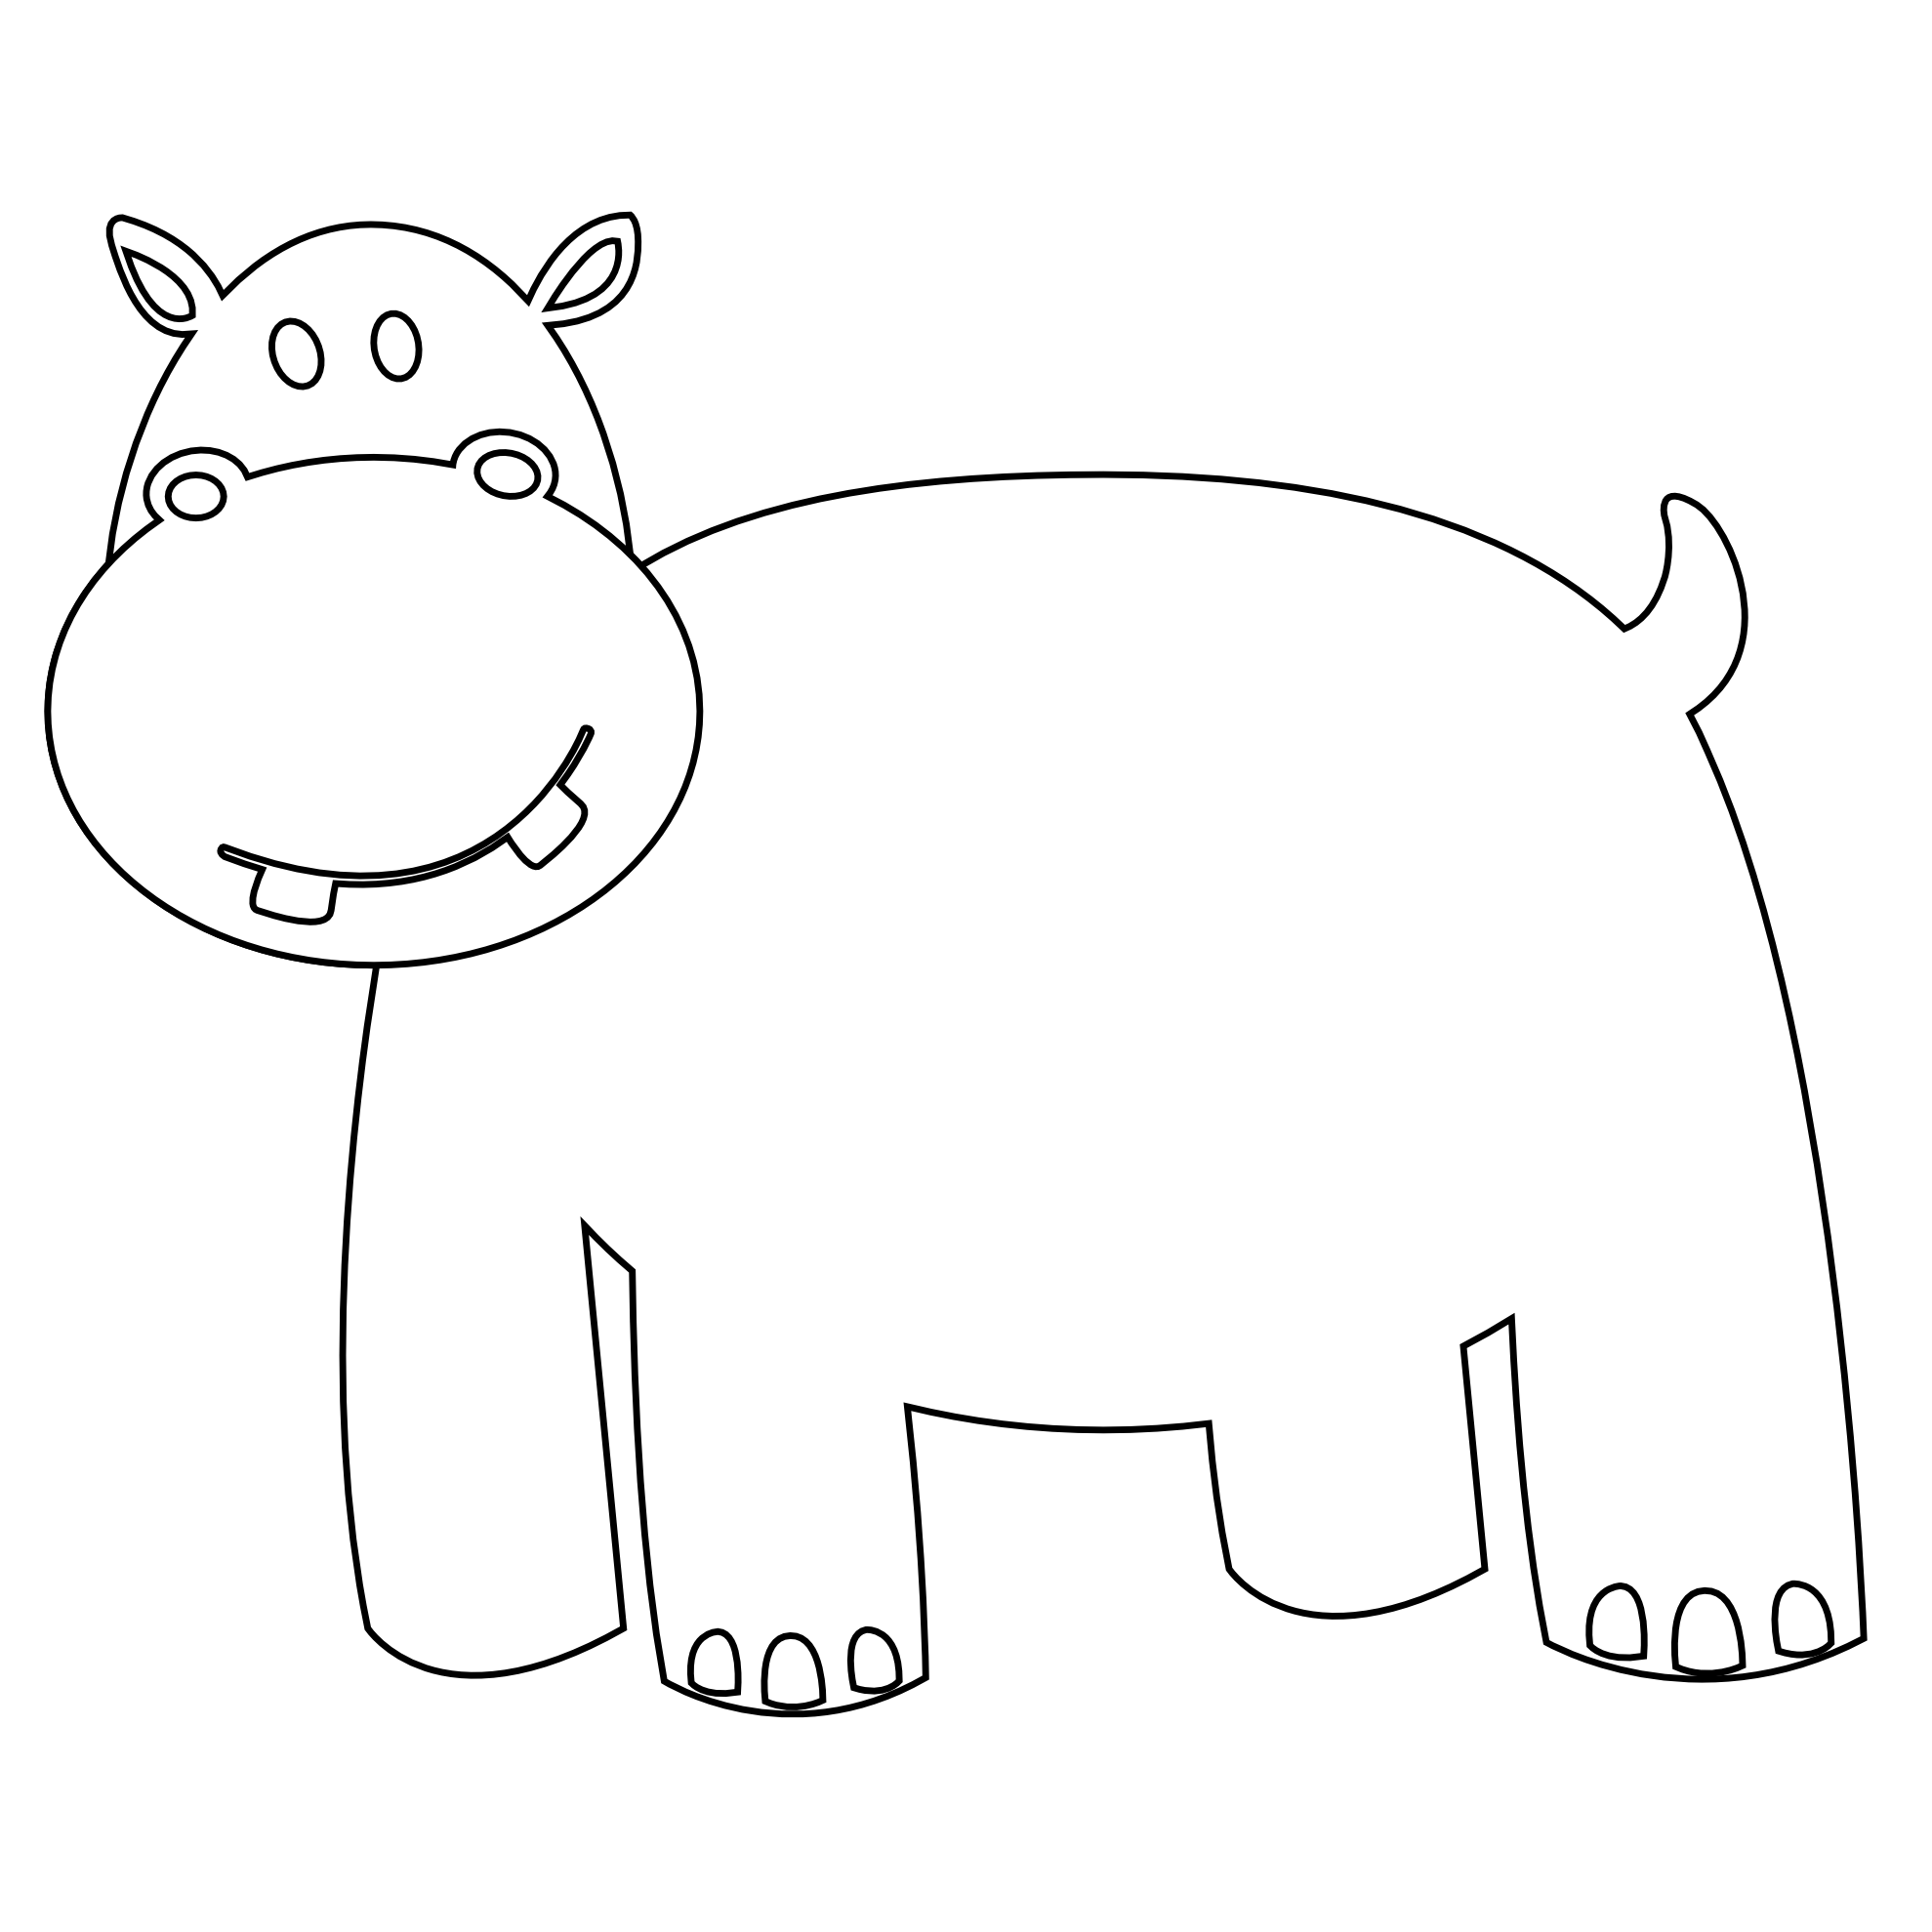 Line Drawing Of Animals - ClipArt Best